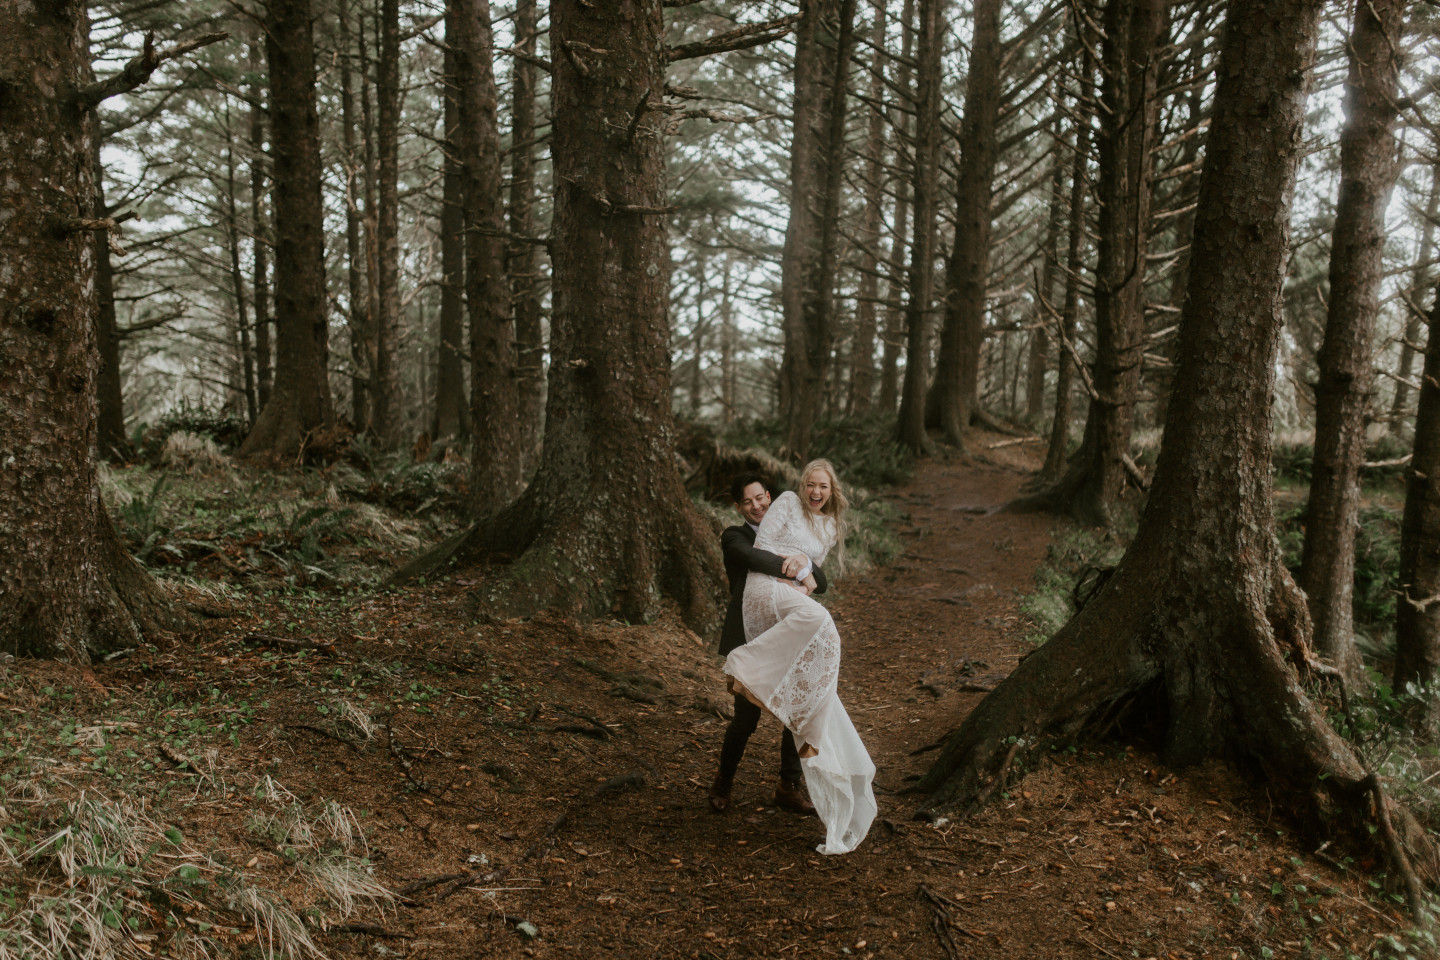 Grant lifts and spins Hannah along a path in Cannon Beach, Oregon. Wedding photography in Portland Oregon by Sienna Plus Josh.